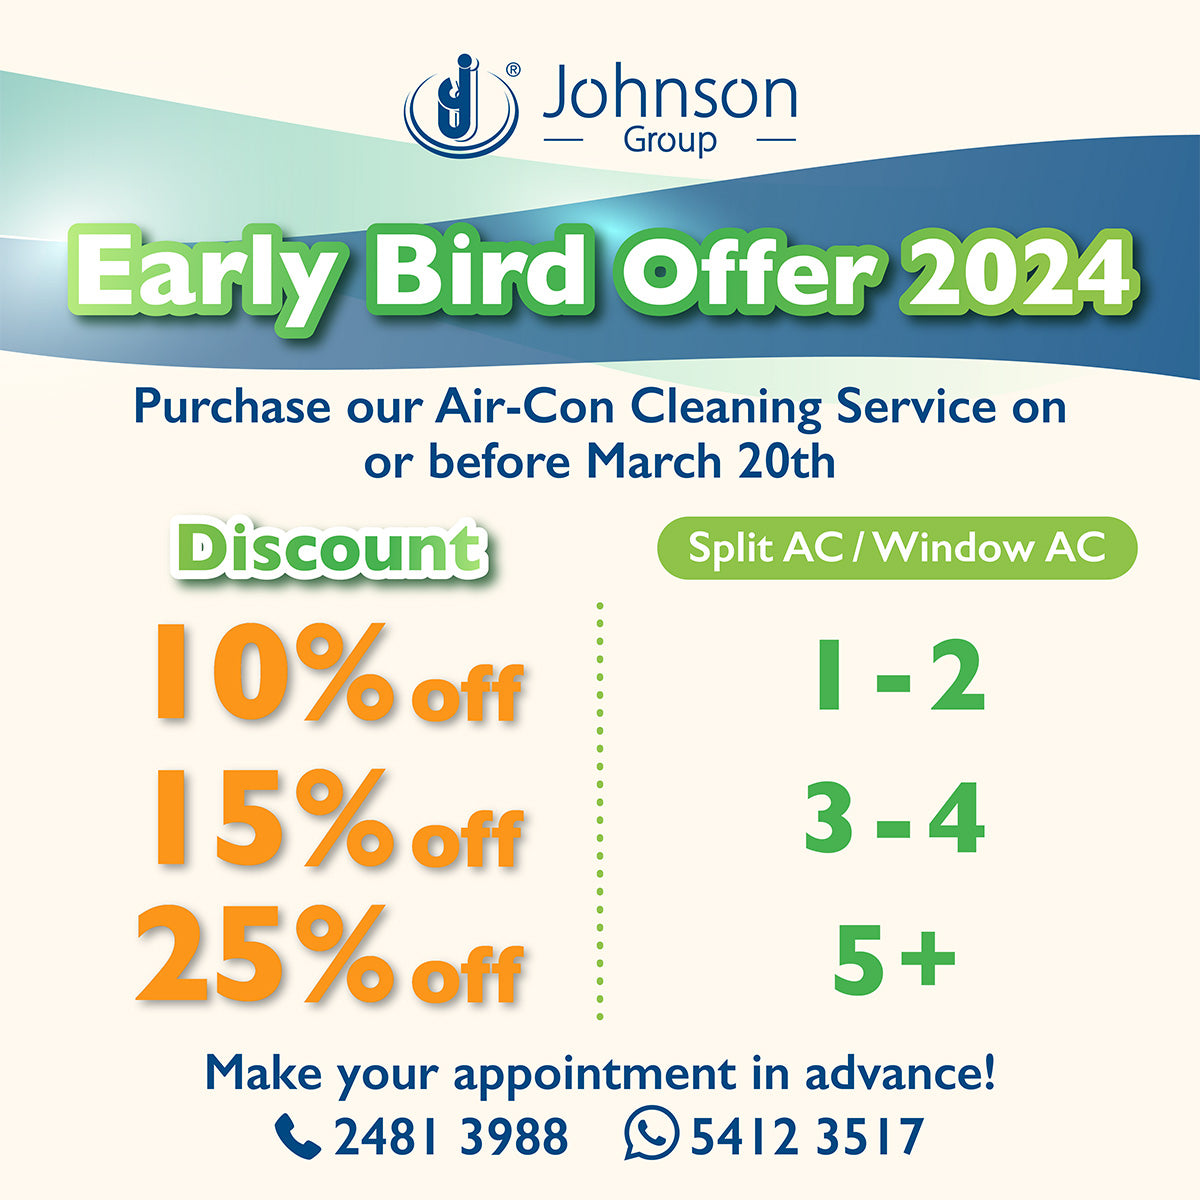 Johnson Group - Air Conditioner Cleaning & Sanitizing Service